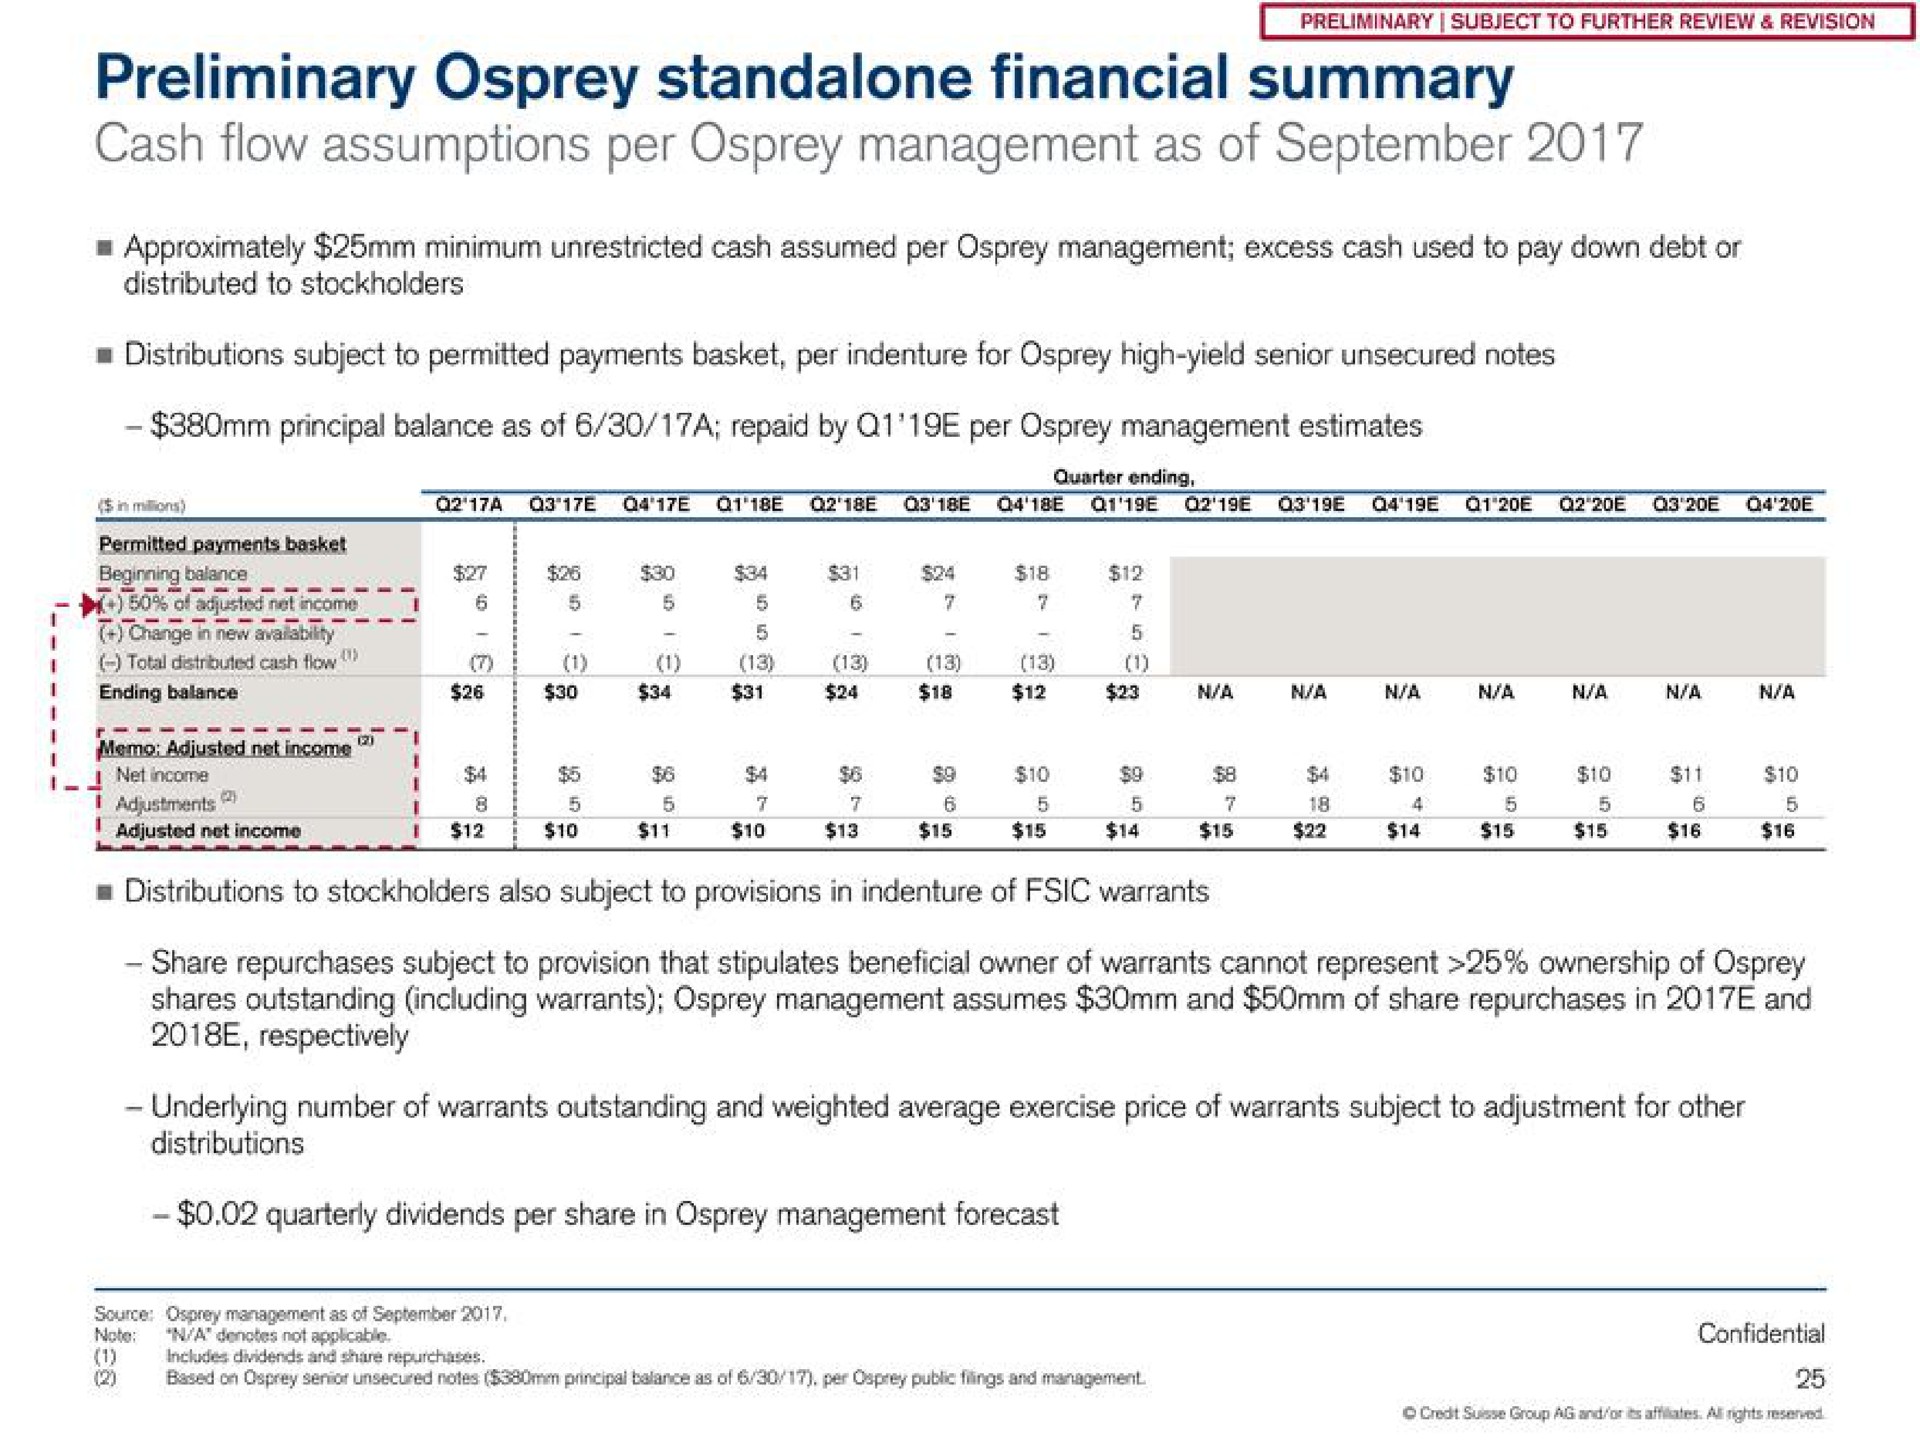 preliminary osprey financial summary cash assumptions per osprey management as of | Credit Suisse